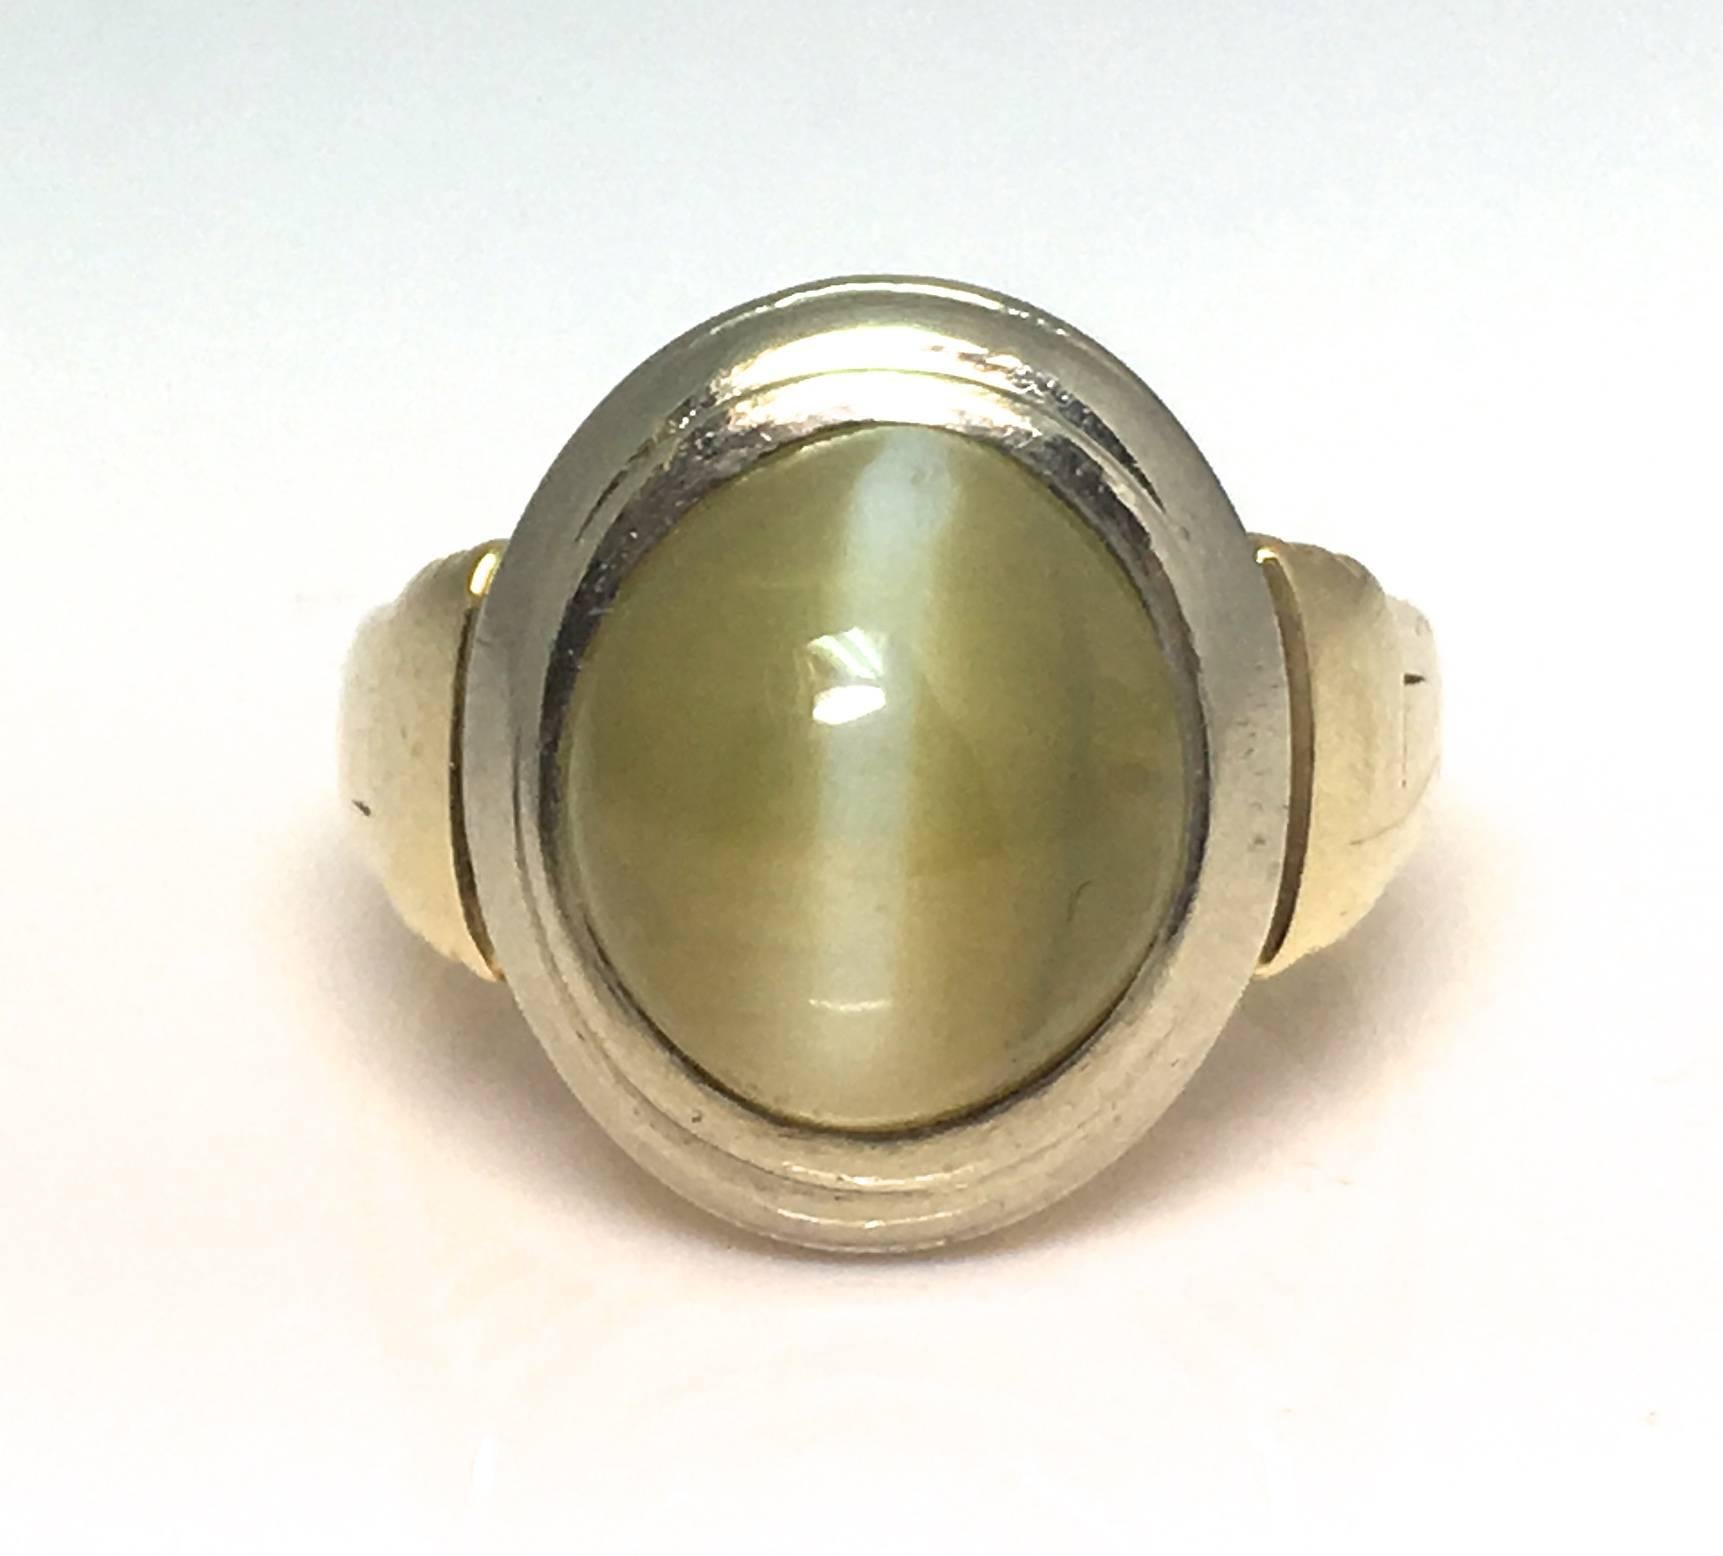 A Circa 1960s Chrysoberl Cats Eye Mans ring. This cabochon cut Cats eye is in a rub over set surrounded by 18ct white gold to a yellow gold shank. The stone weighs circa 8 carats. The beautiful and unusual attribute or phenomenon of this stone is